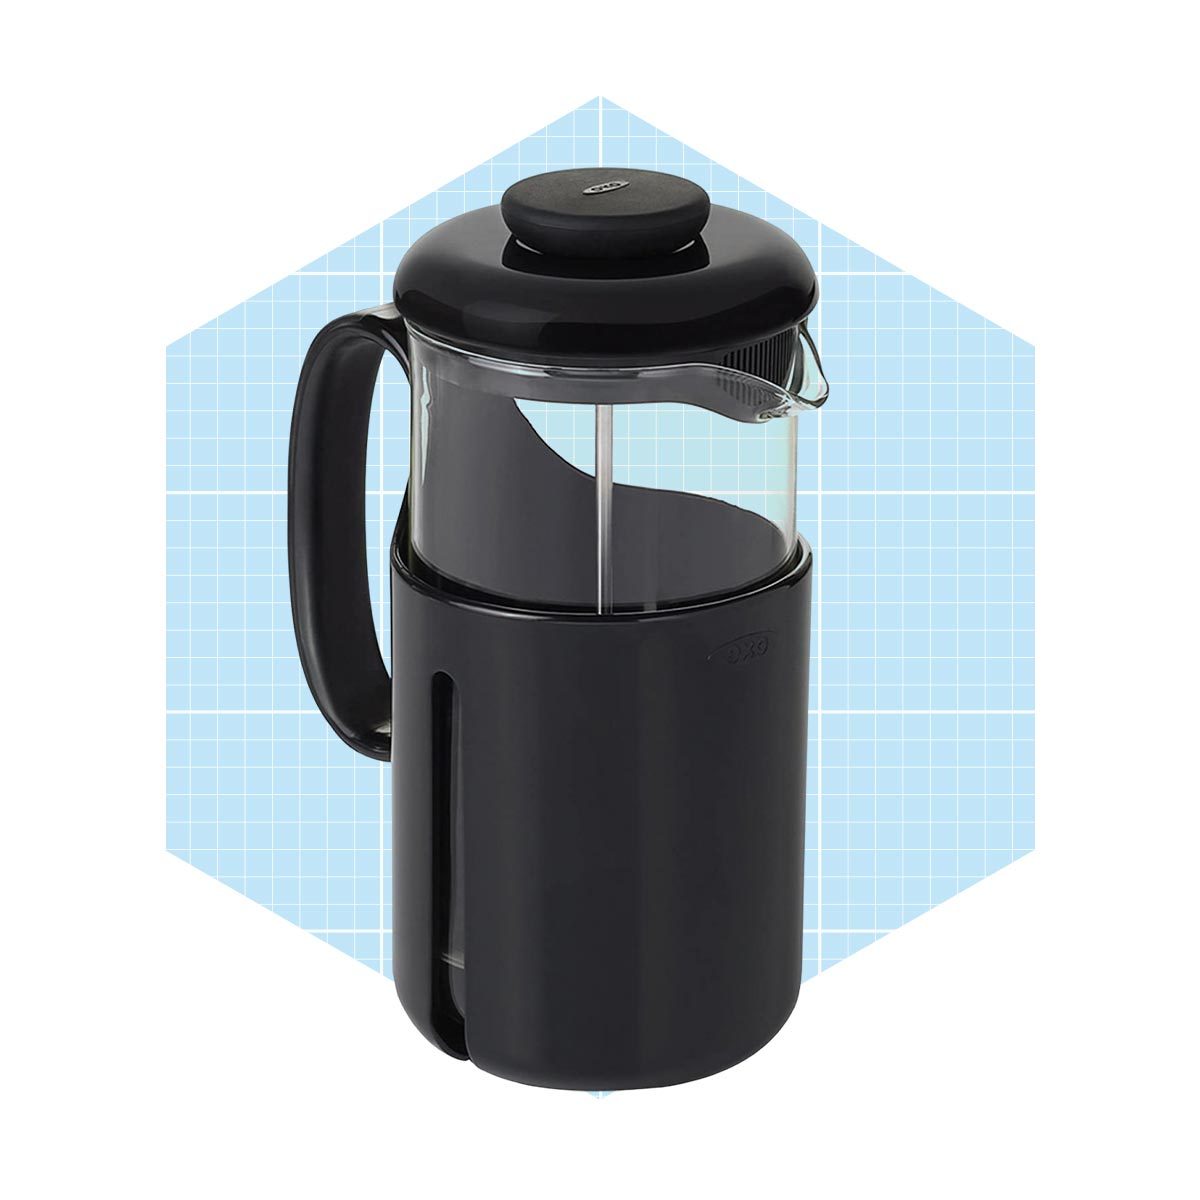 <h3>Oxo Brew Venture Travel French Press</h3> <p><span>Love a cup of freshly pressed coffee? A French press is easy to use and the <a href="https://www.amazon.com/dp/B01KTBQAKI" rel="noopener">Oxo Brew</a> is no exception. This lightweight, 8-cup French press is shatter-resistant and made from bisphenol A (BPA)-free plastic. Weighing under 1 pound and measuring in at 9.4 inches tall, this 1-liter coffee press has a user-friendly pouring spout with extra filtration to cut down on grounds in your cup. The dishwasher-safe clear carafe lets you see your coffee brew and, in a matter of minutes of adding coffee grounds and hot water, you'll be sipping your java in serenity.</span></p> <p>"<span>I bought his for my husband for a <span>camping</span> trip. He’s never used a French press before, but I assured him it was very easy to do. He took it with him and he raved about it! He said it was super easy to use and clean, and he said the flavor was good and he thanked me for it," says <a href="https://www.amazon.com/gp/customer-reviews/RU5DPYT2OZKY1/" rel="noopener">Tiffany A. Davis</a>, a verified purchaser.</span></p> <p><strong>Pros</strong></p> <ul> <li><span>Weights less than 1 pound</span></li> <li><span>Carafe is shatter-resistant</span></li> <li>Has a 1-liter capacity</li> <li>Features an easy-pour spout</li> </ul> <p><strong>Cons</strong></p> <ul> <li>Not ideal for one person</li> </ul> <p class="listicle-page__cta-button-shop"><a class="shop-btn" href="https://www.amazon.com/dp/B01KTBQAKI">Shop Now</a></p>